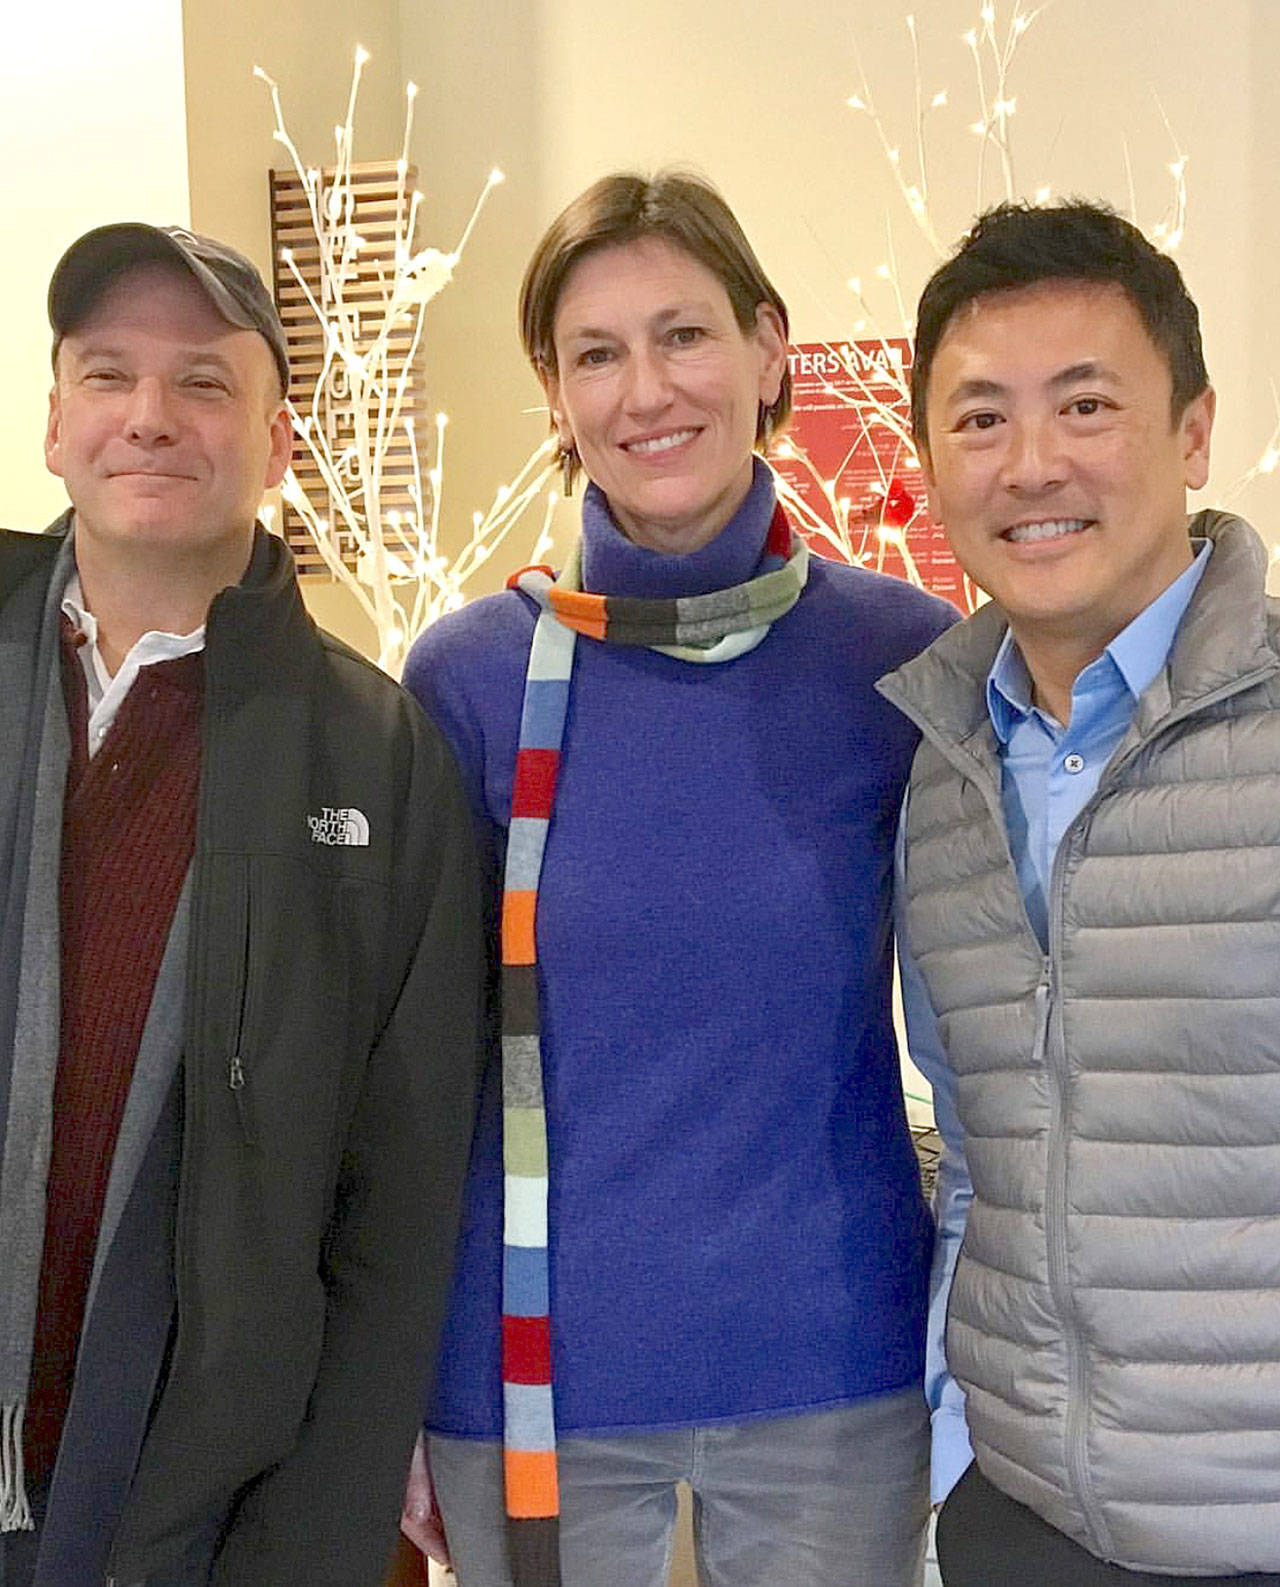 From left, director of local services John Taylor welcomes Danielle de Clercq as deputy director and Jim Chan as director of the permitting division. Photo courtesy of King County Local Services